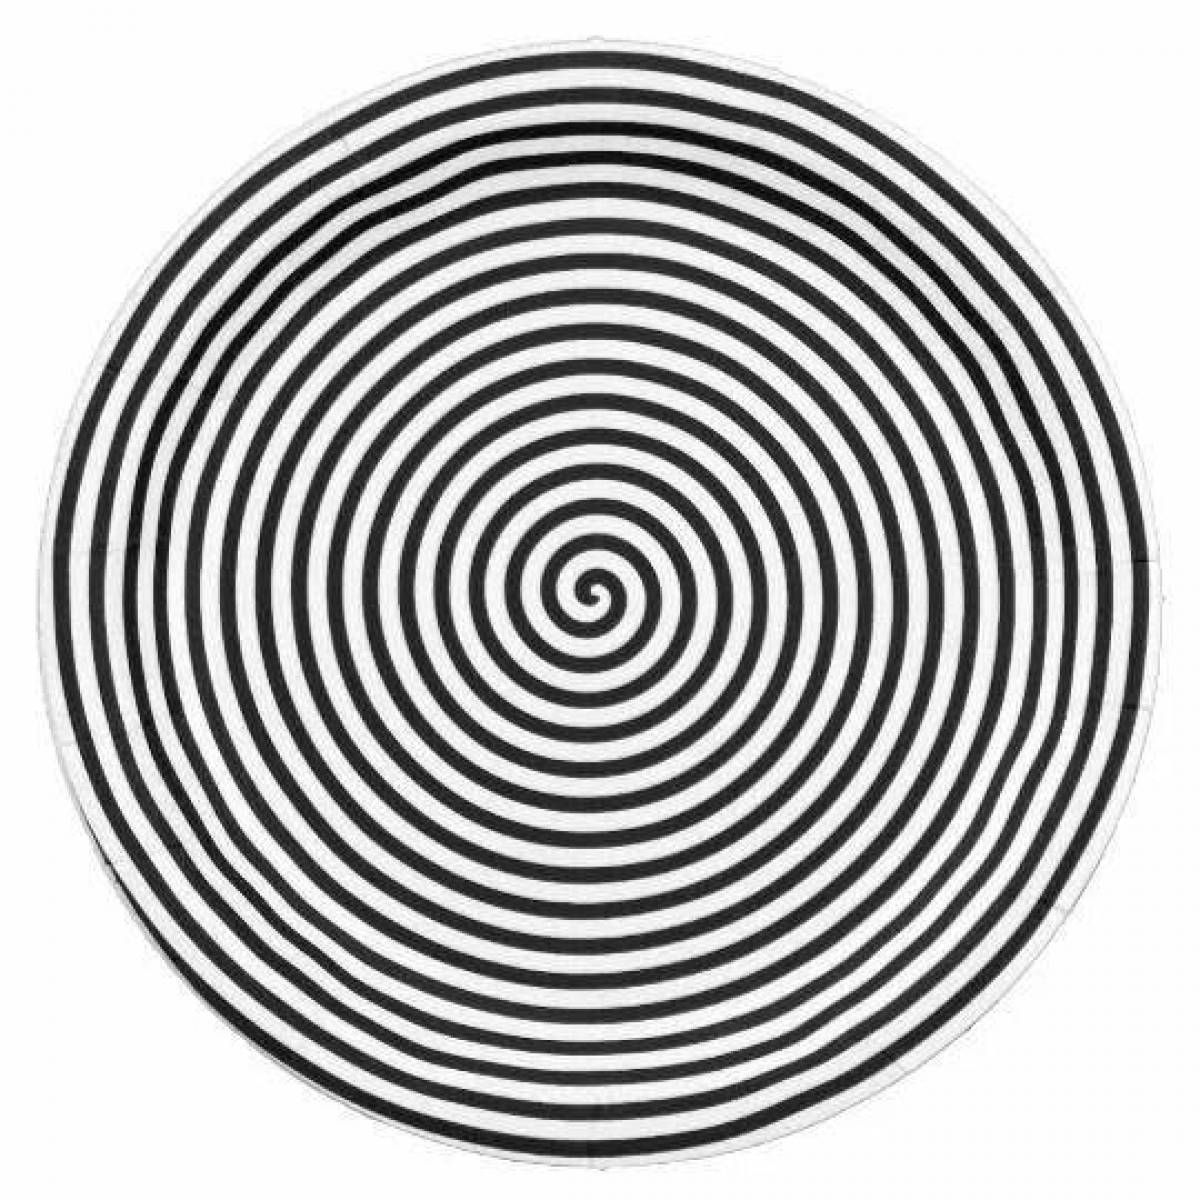 Awesome Coloring Hidden Spiral Pattern